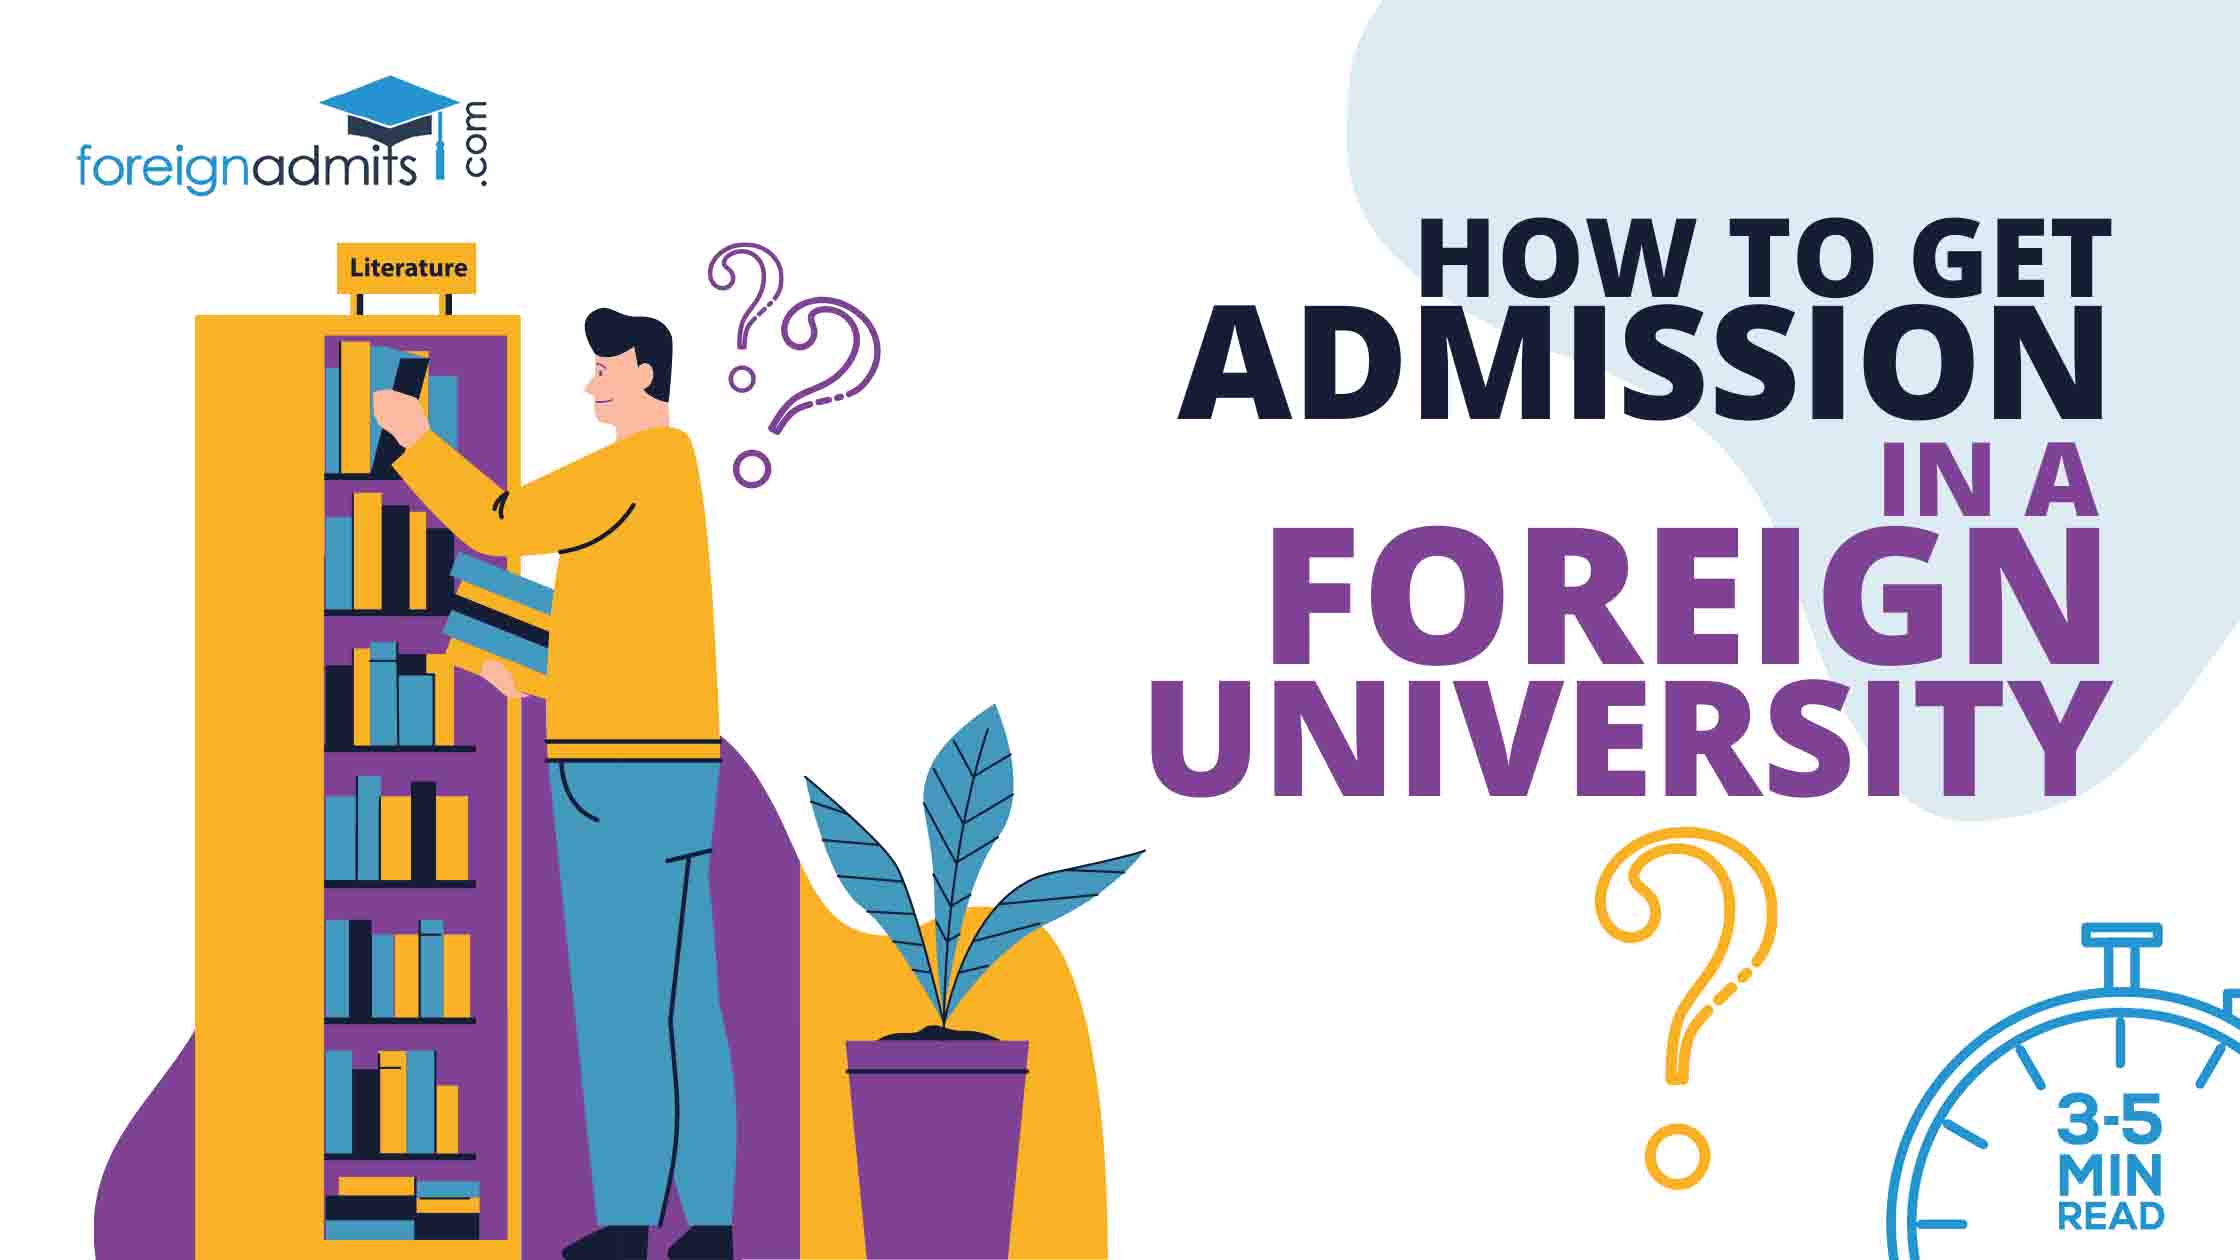 How to get admission in a foreign university?